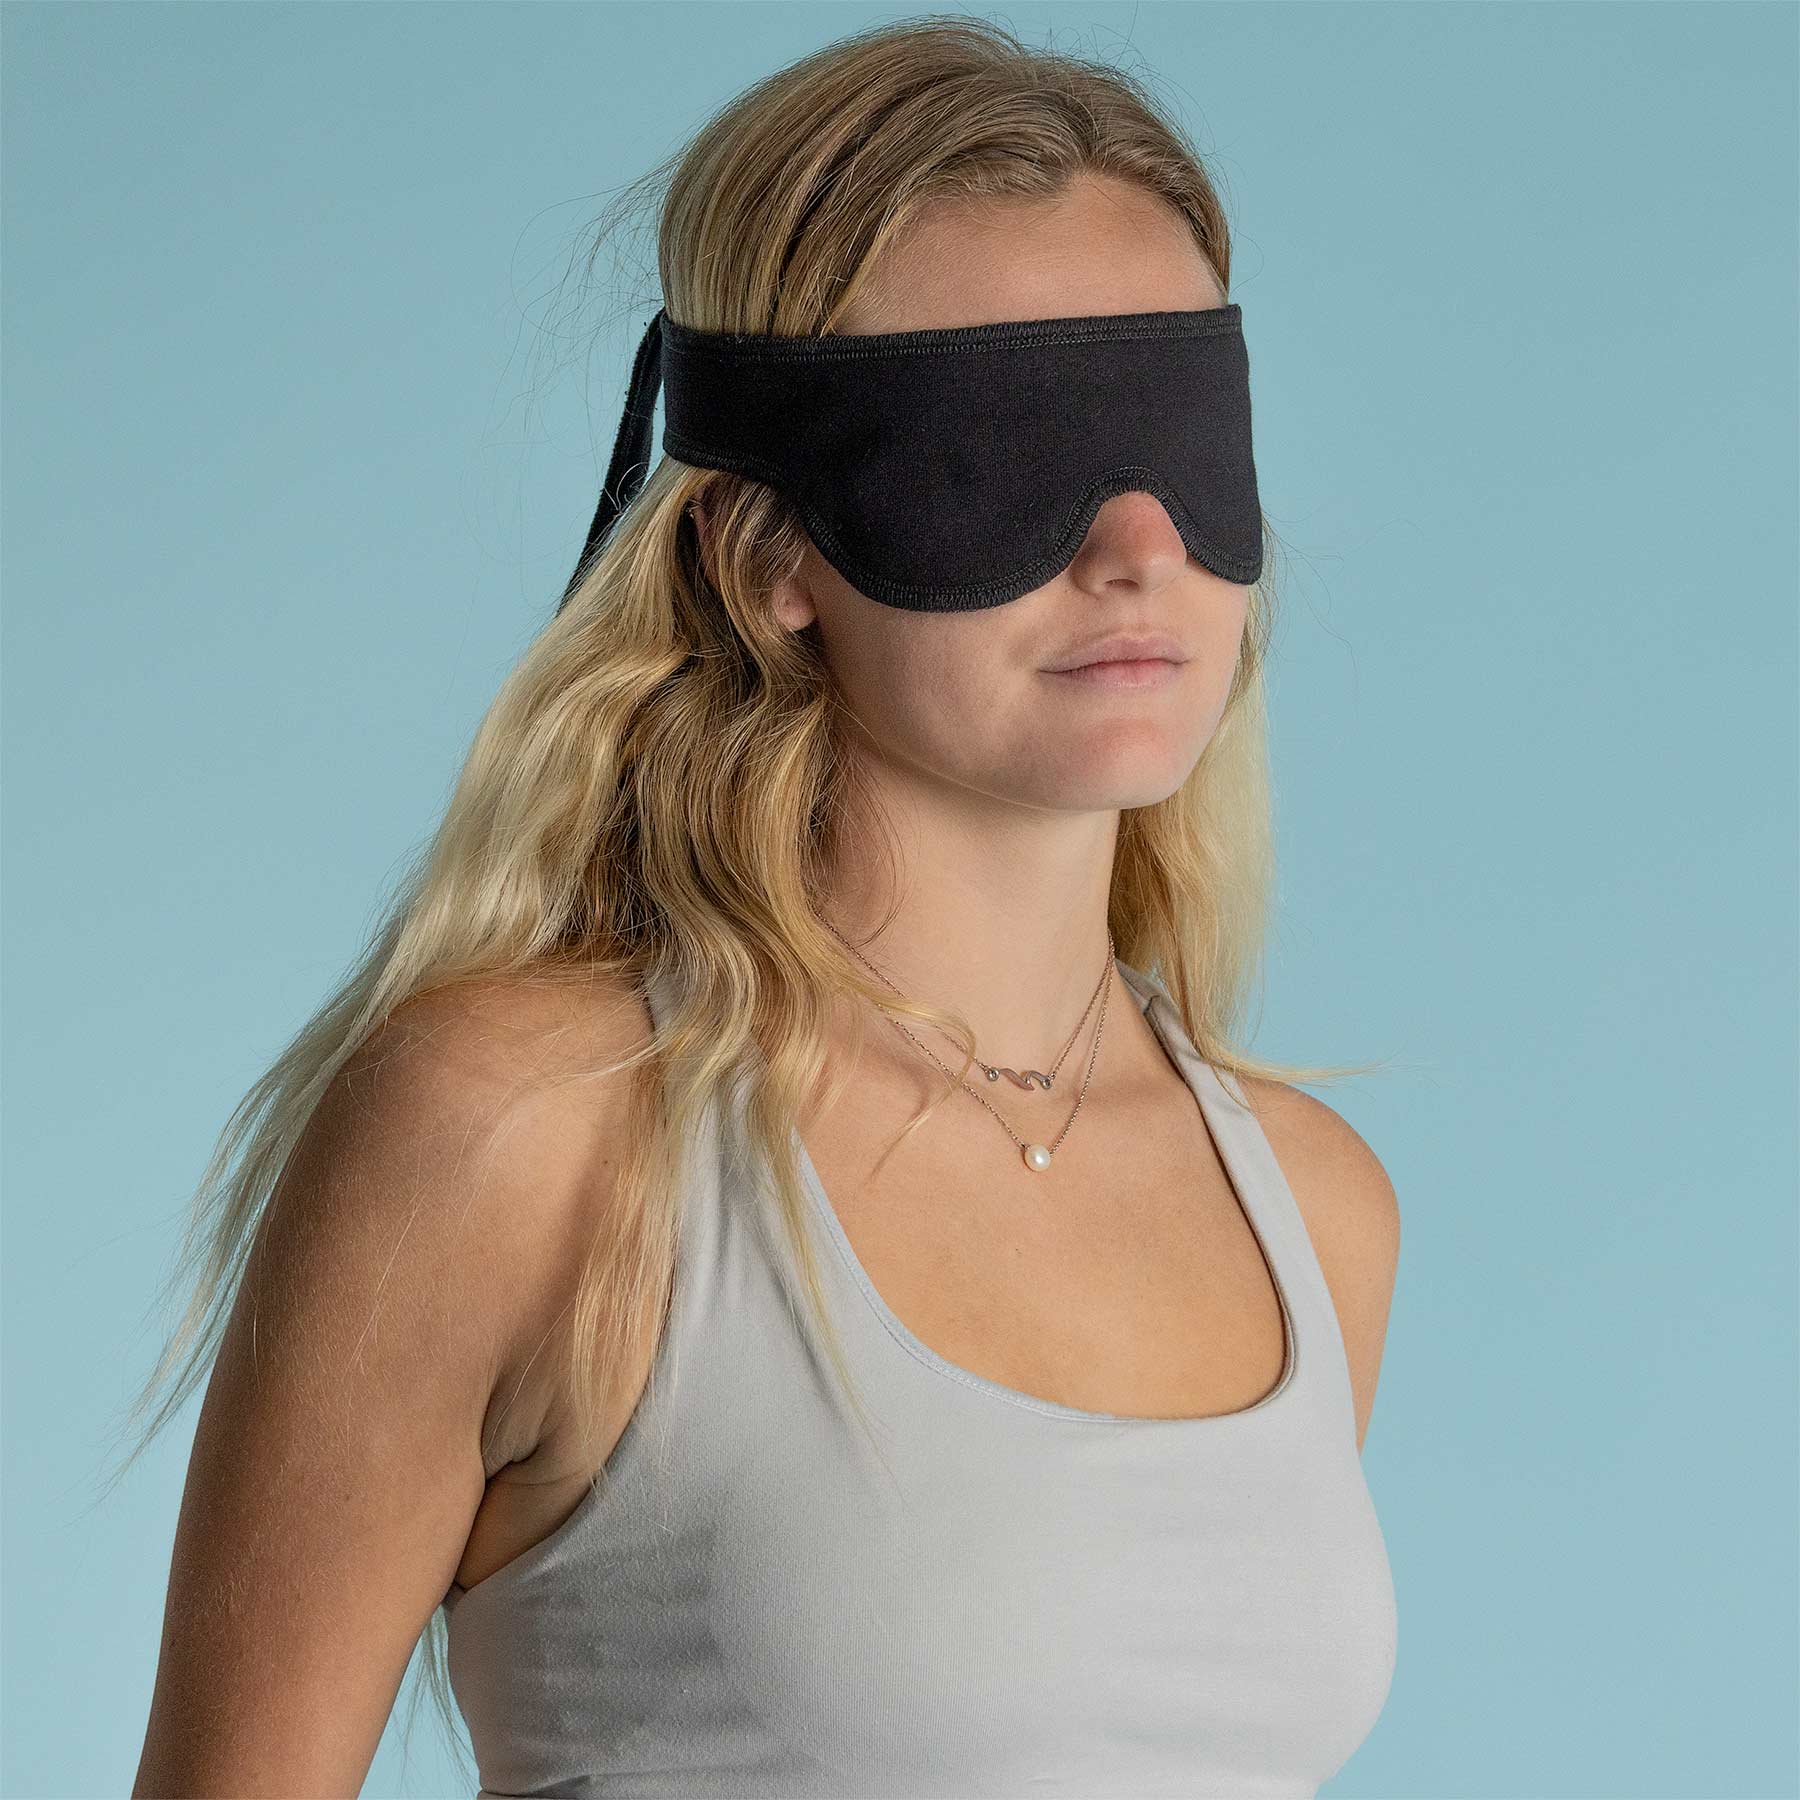 Cotton Blindfolds, 6-pack